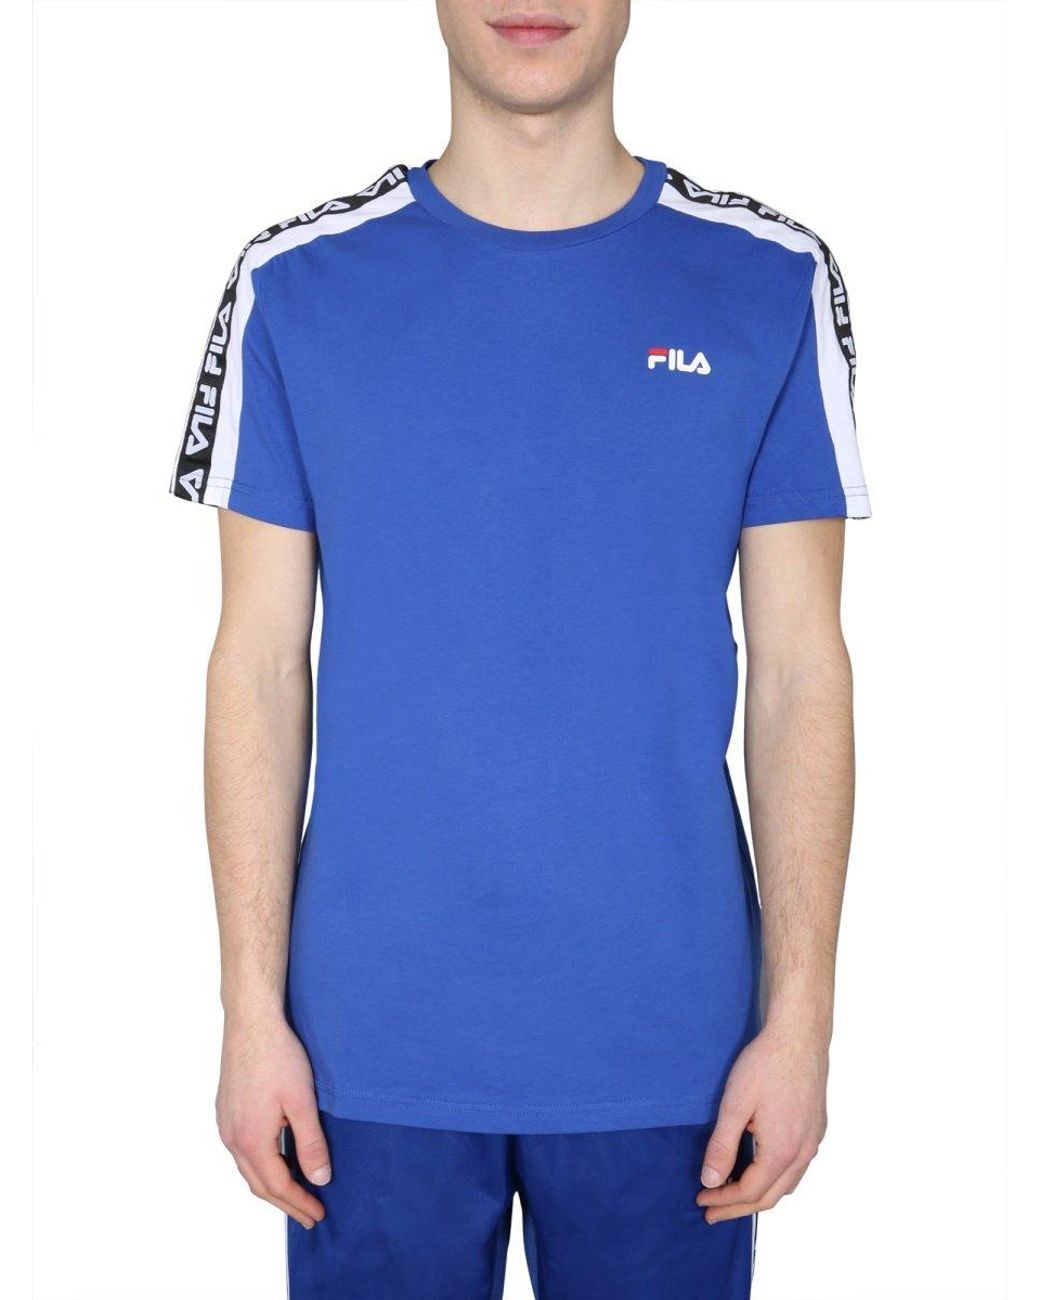 Fila Cotton Logo T-shirt in Blue for Men - Save 45% - Lyst